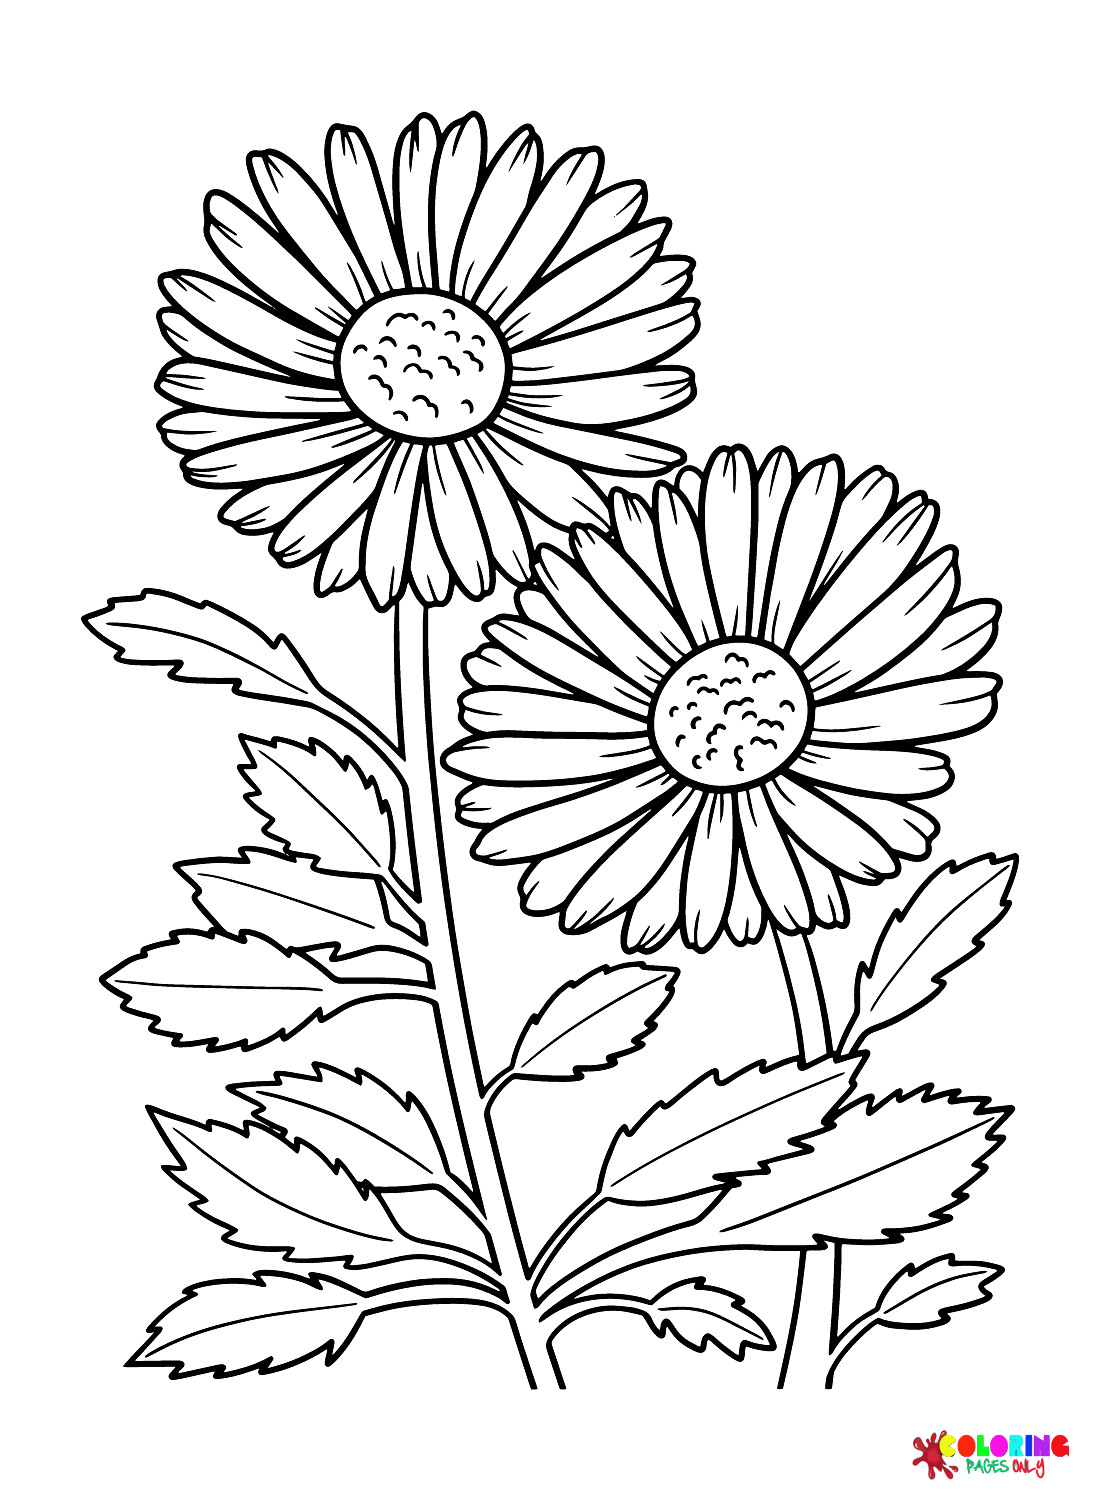 Printable Daisy Coloring Page